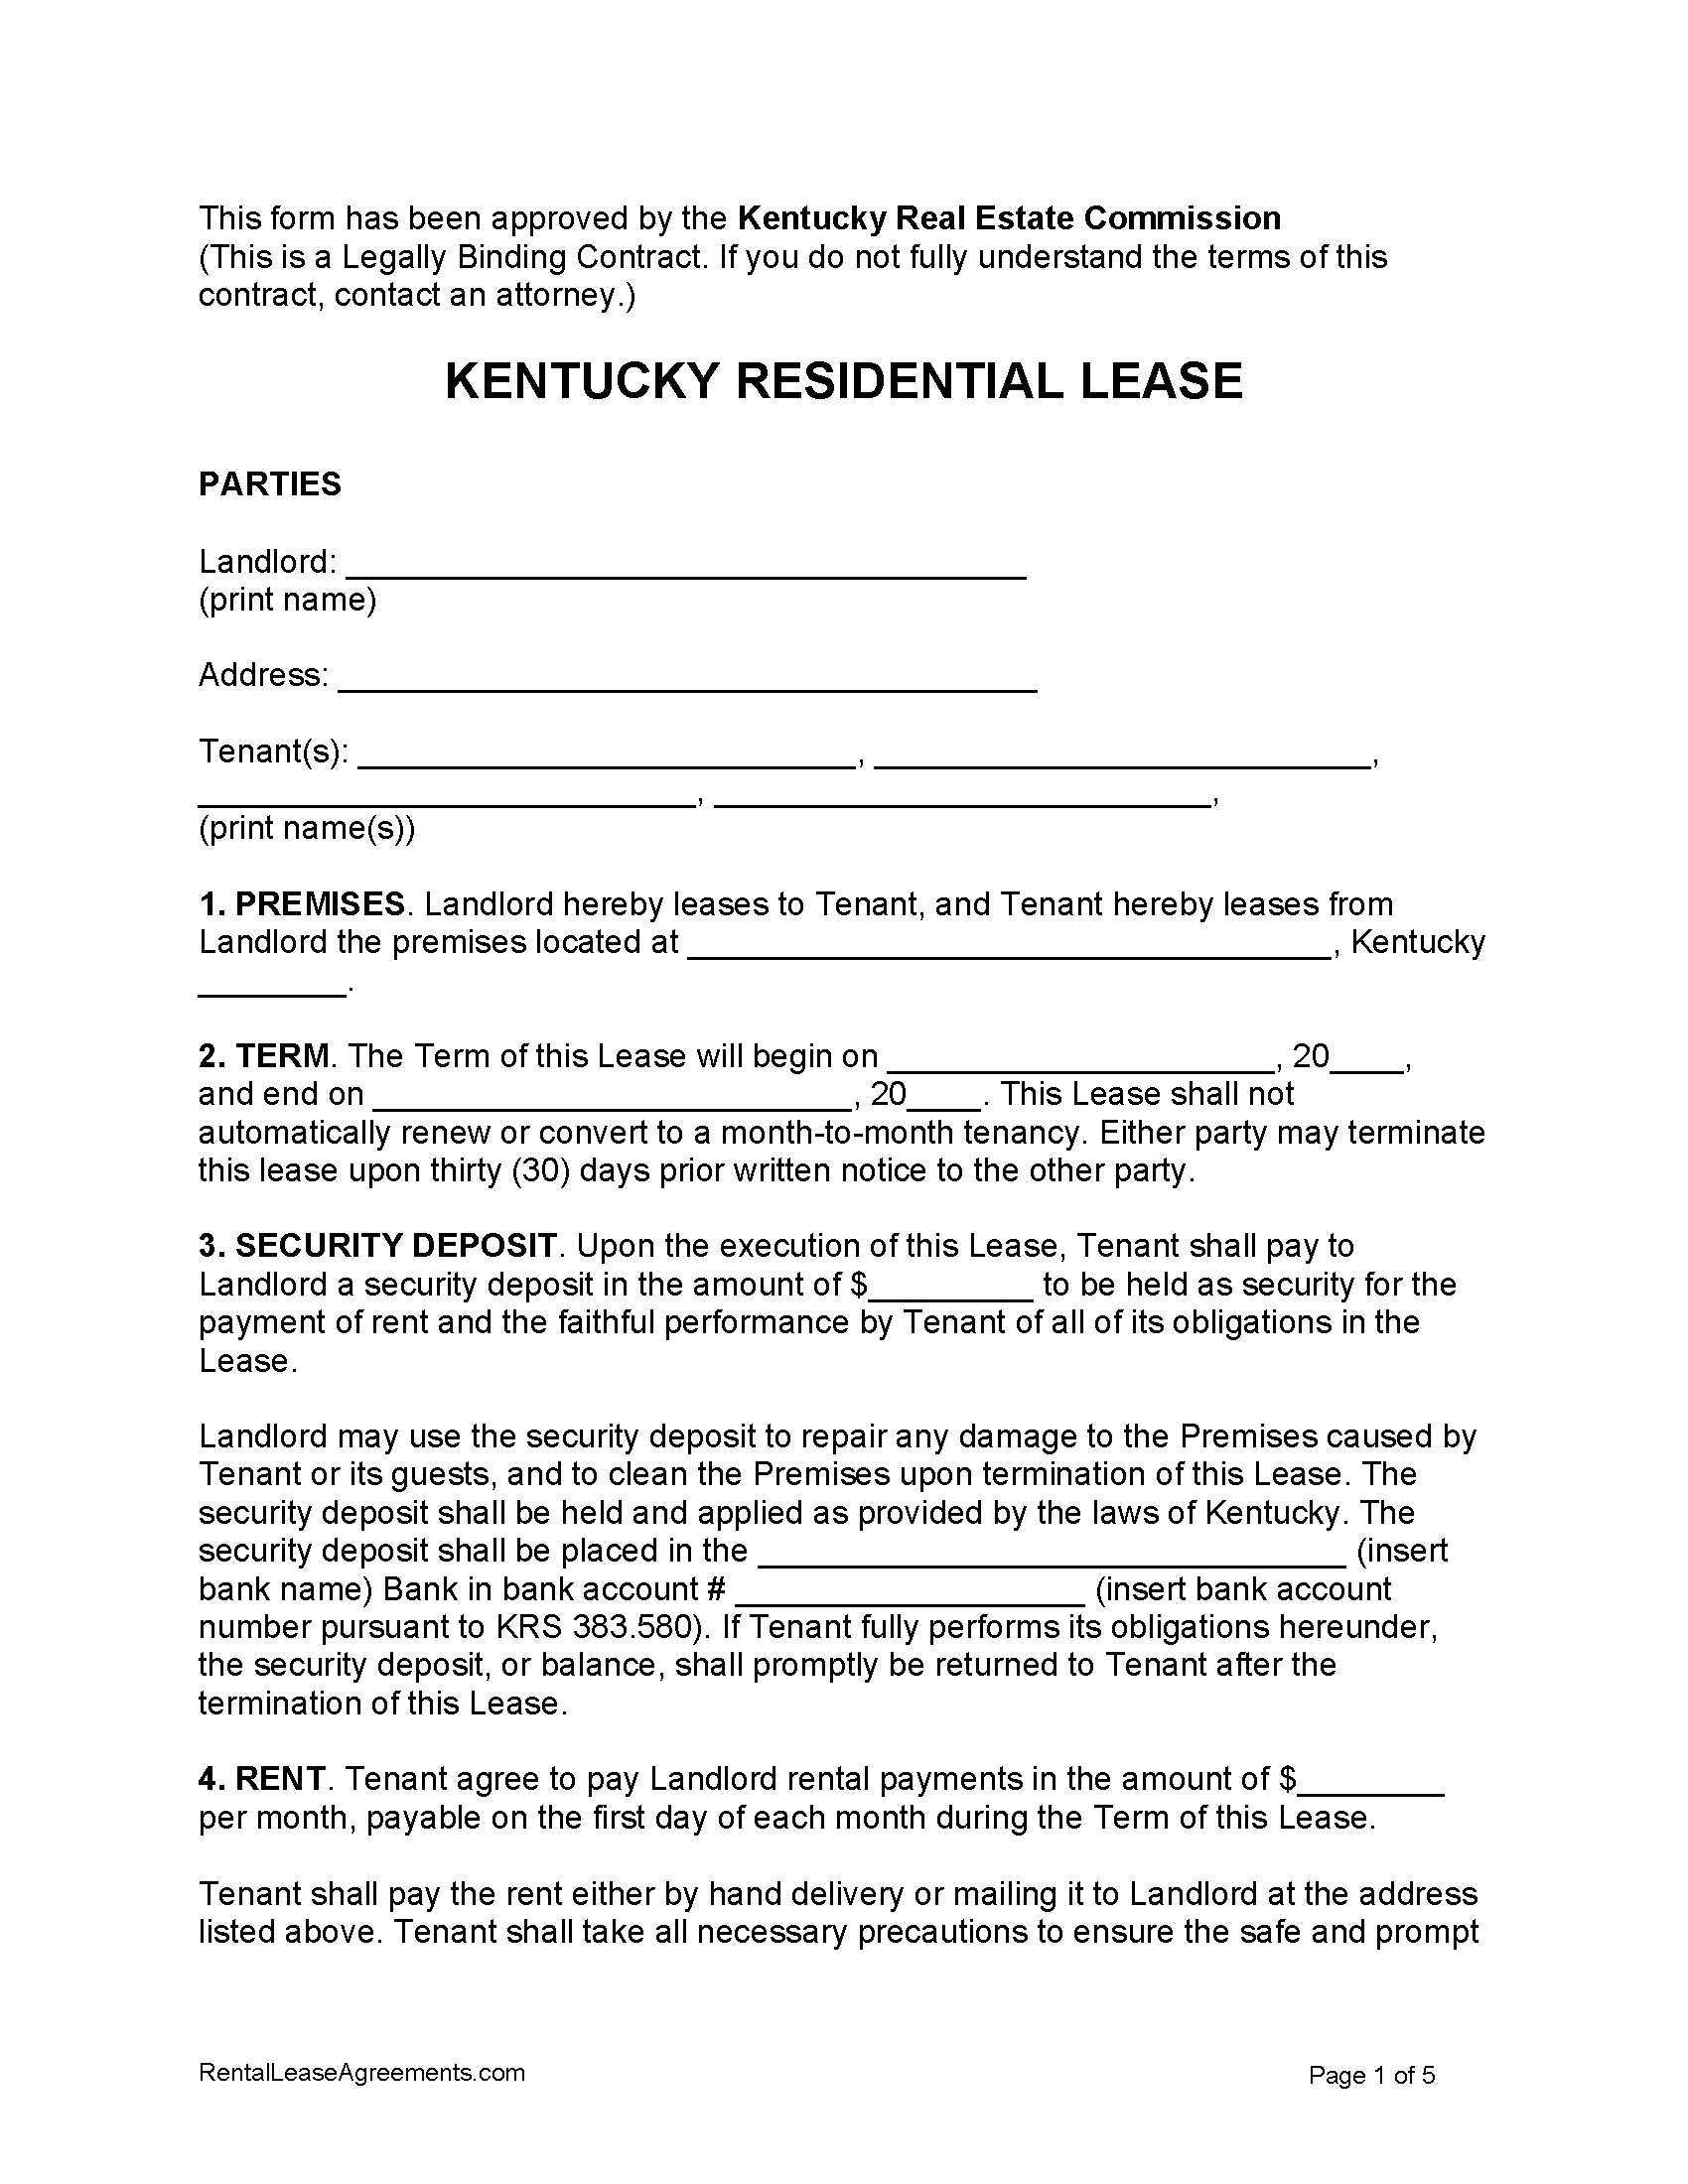 free-kentucky-residential-lease-agreement-pdf-ms-word